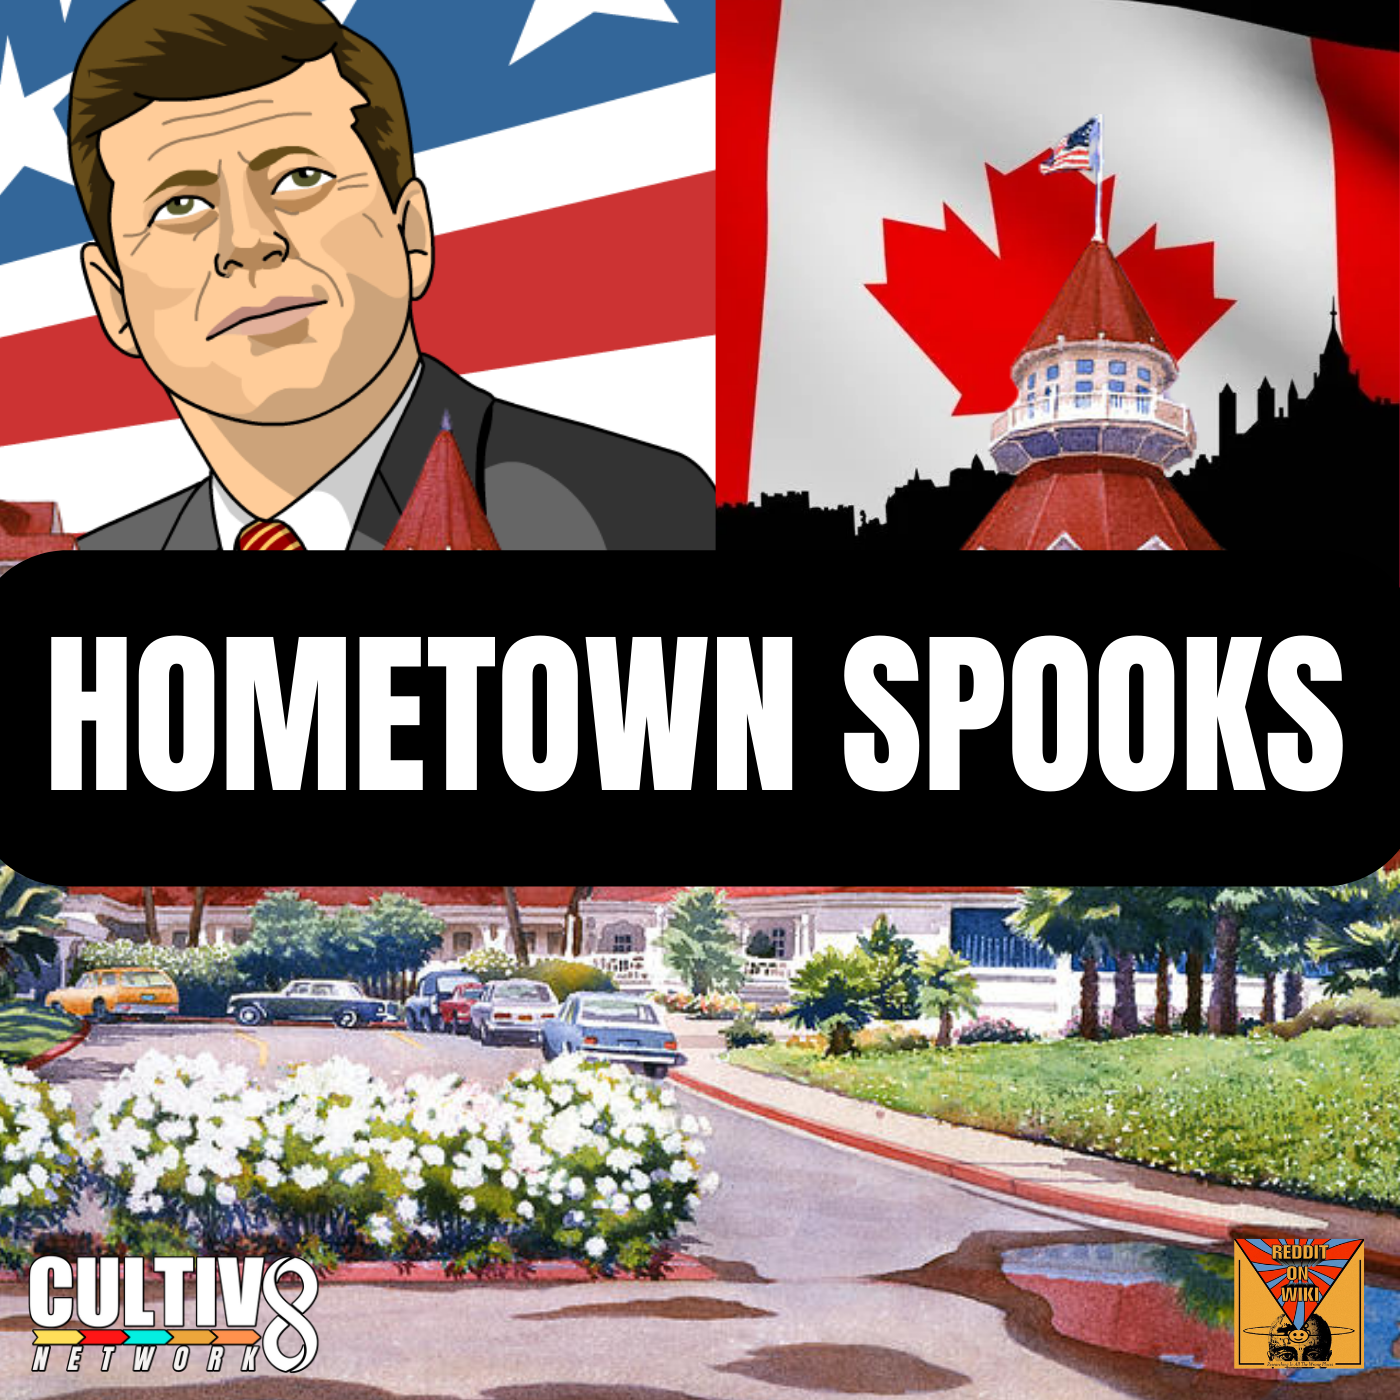 Hometown Stories/Spooks | Is This Even a Real Episode!?